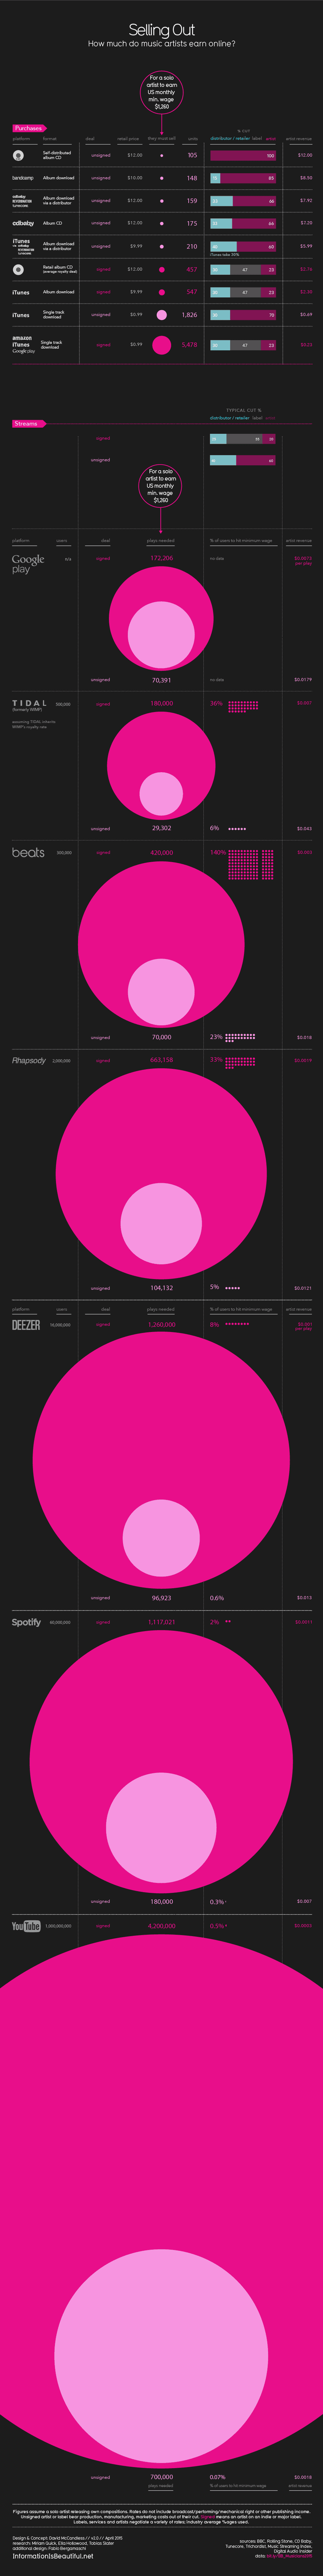 Spotify Infographic updated